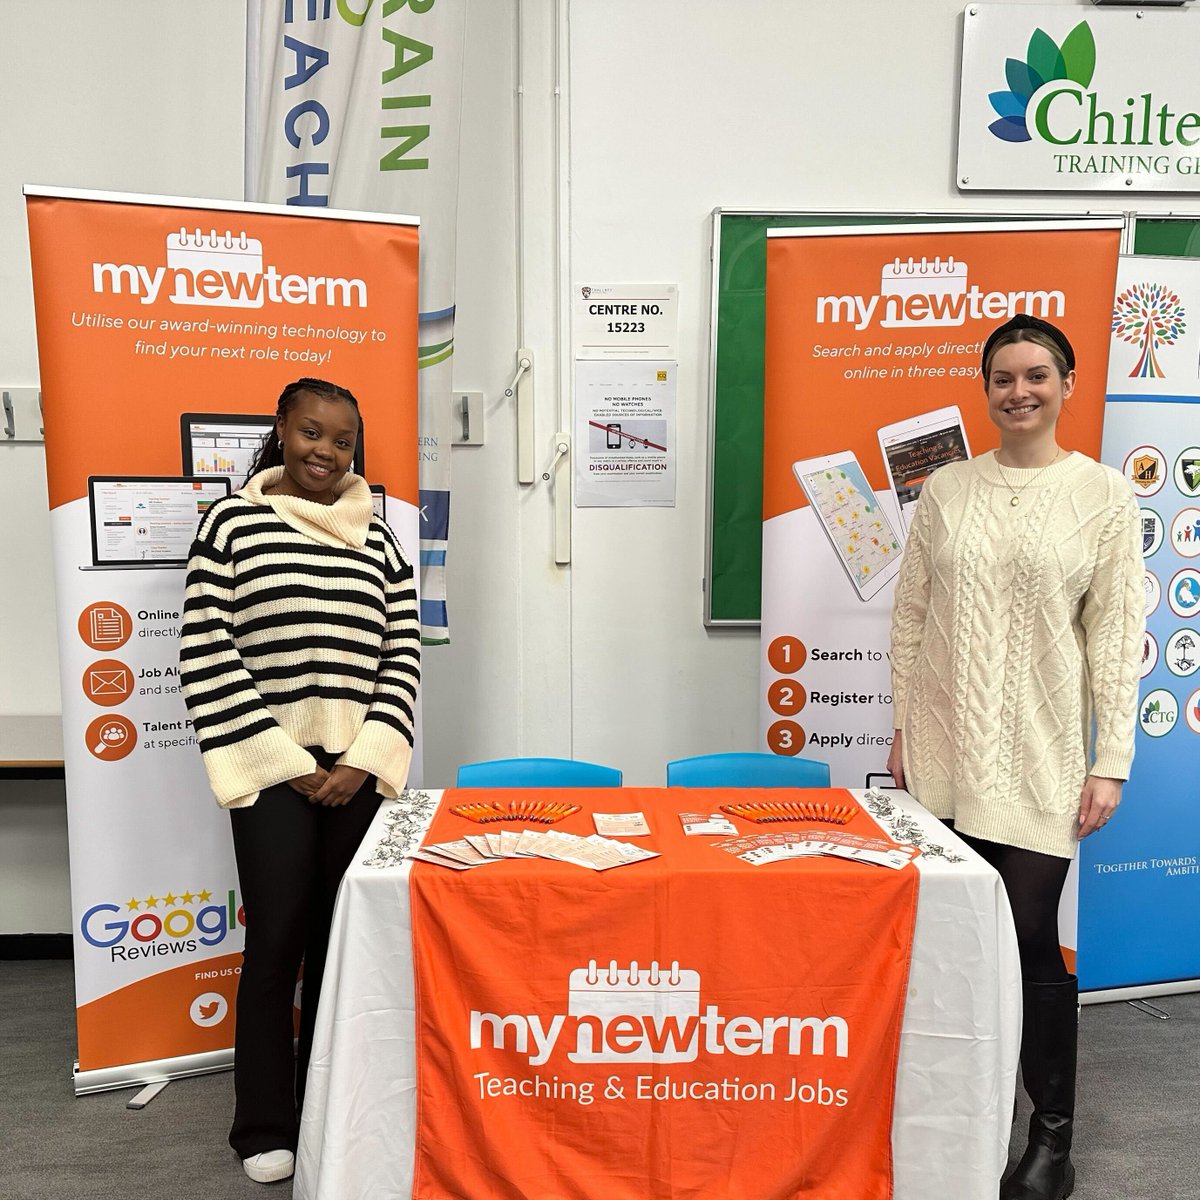 A brilliant recruitment fair at @CTGtraining for trainee teachers this morning. Damaris and Lucy, we're delighted to meet with so many trainees seeking their first ECT role 😊